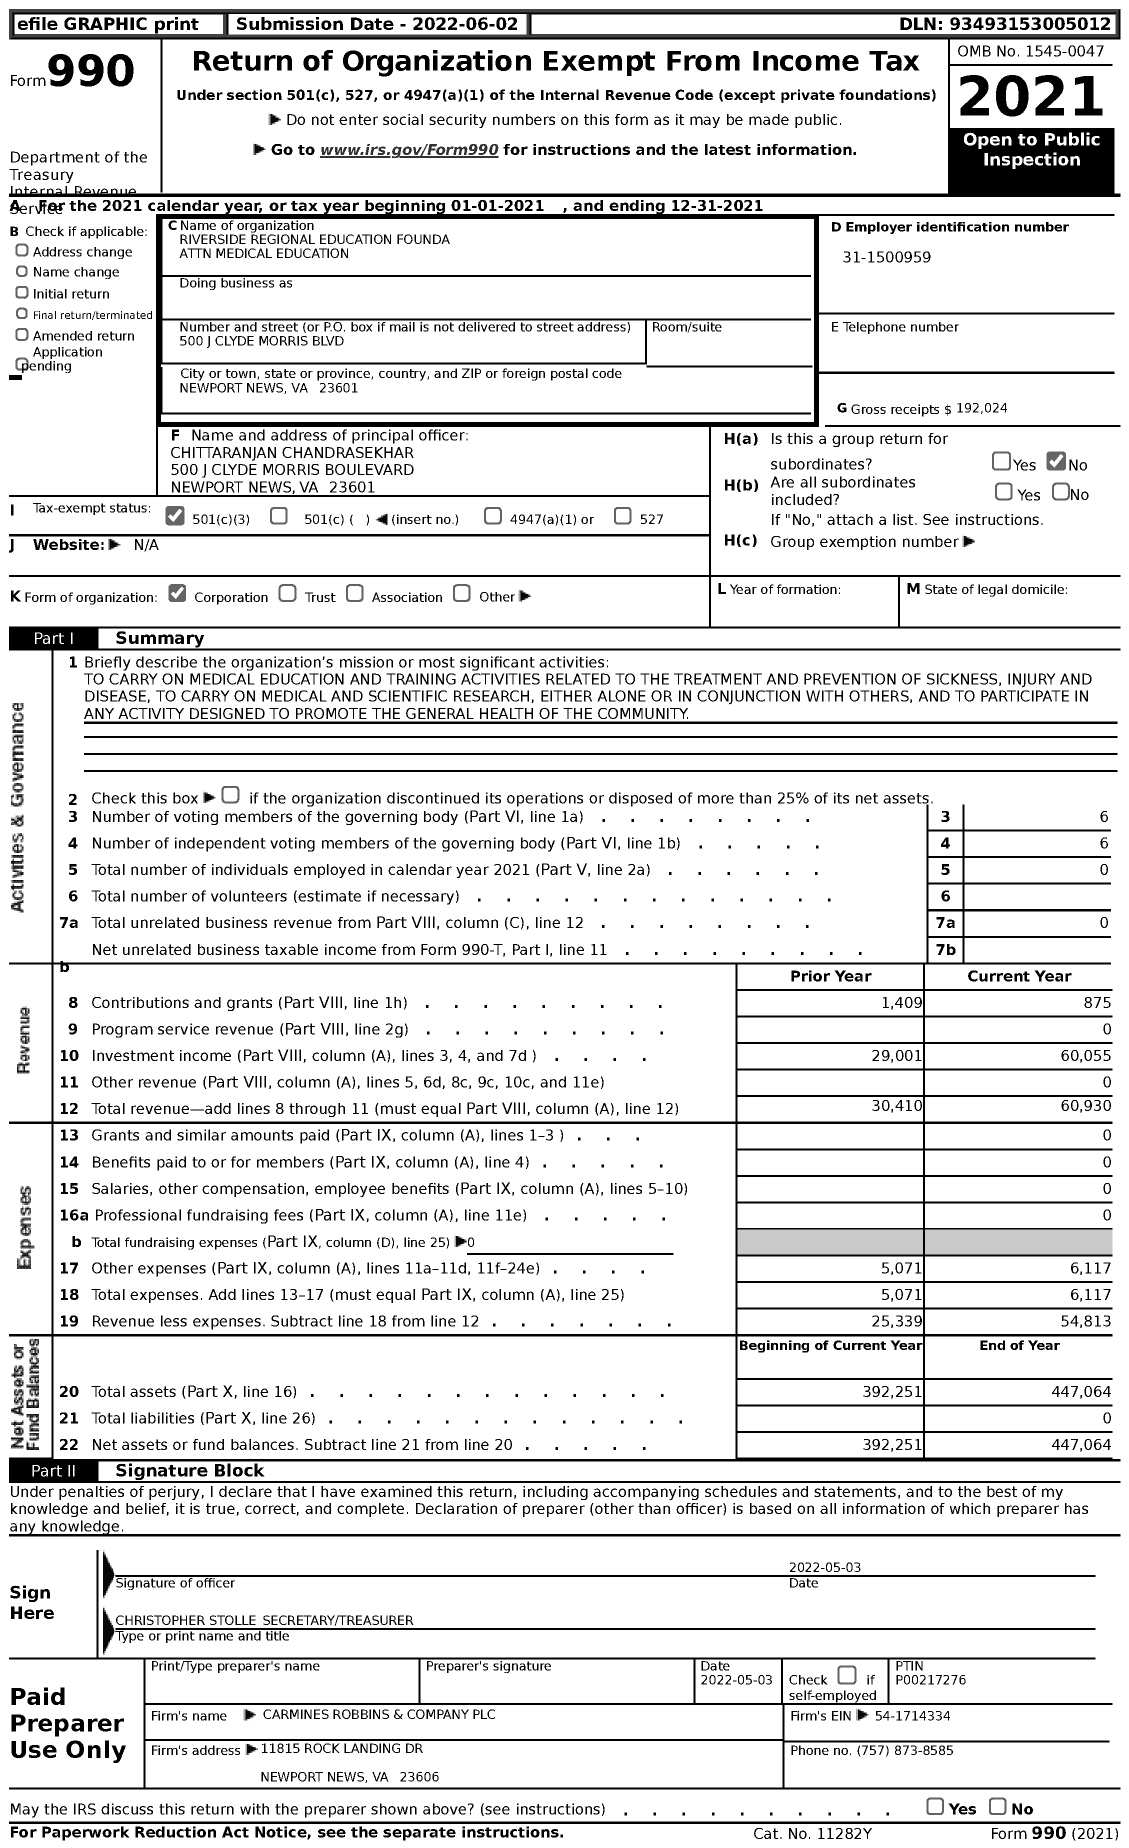 Image of first page of 2021 Form 990 for Riverside Regional Education Founda Attn Medical Education